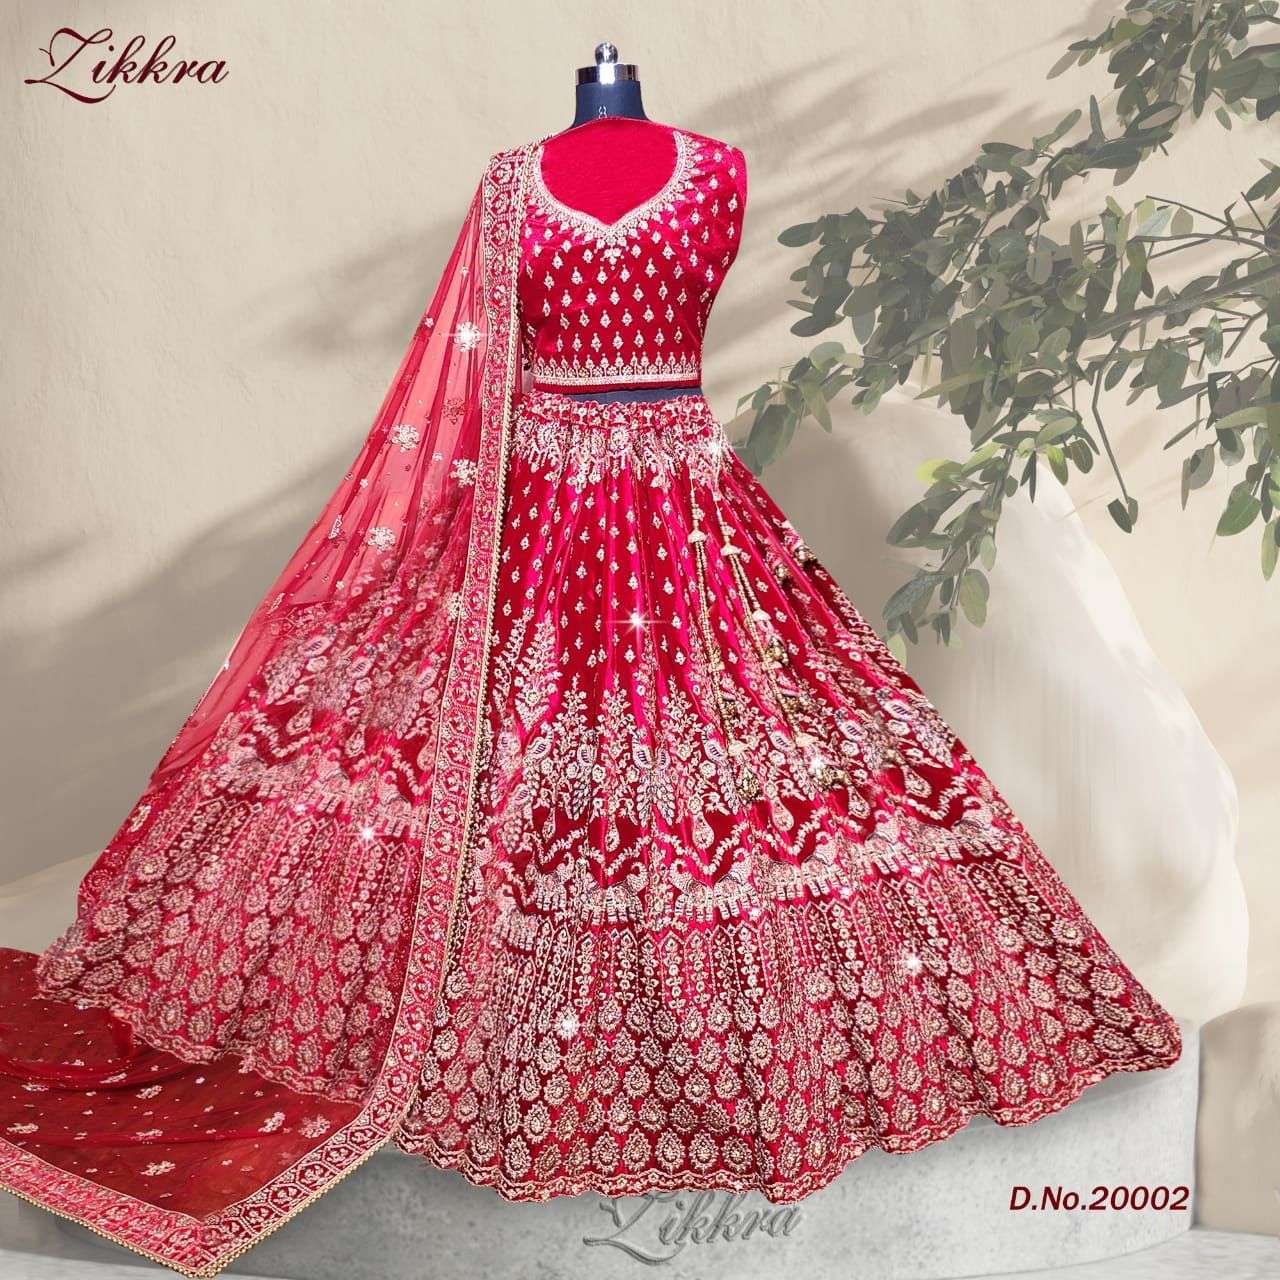 Red Bridal Lehenga By Heer Boutique | Bridal lehenga red, Bridal lehenga,  Bridal dress design